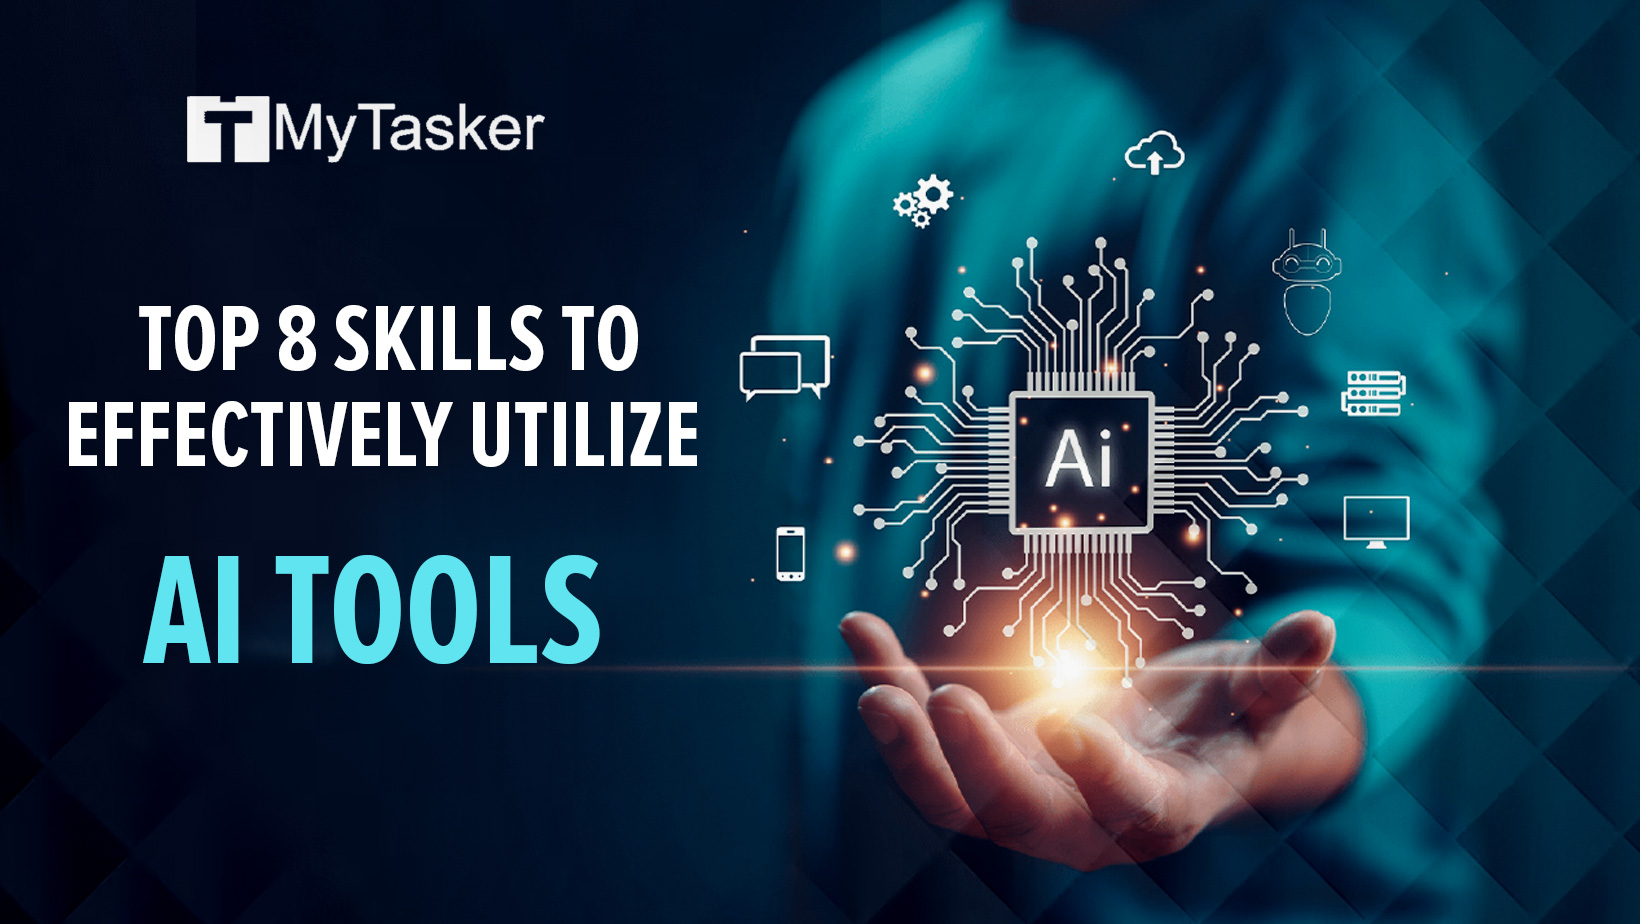 Top 8 Skills To Effectively Utilize AI Tools in Marketing